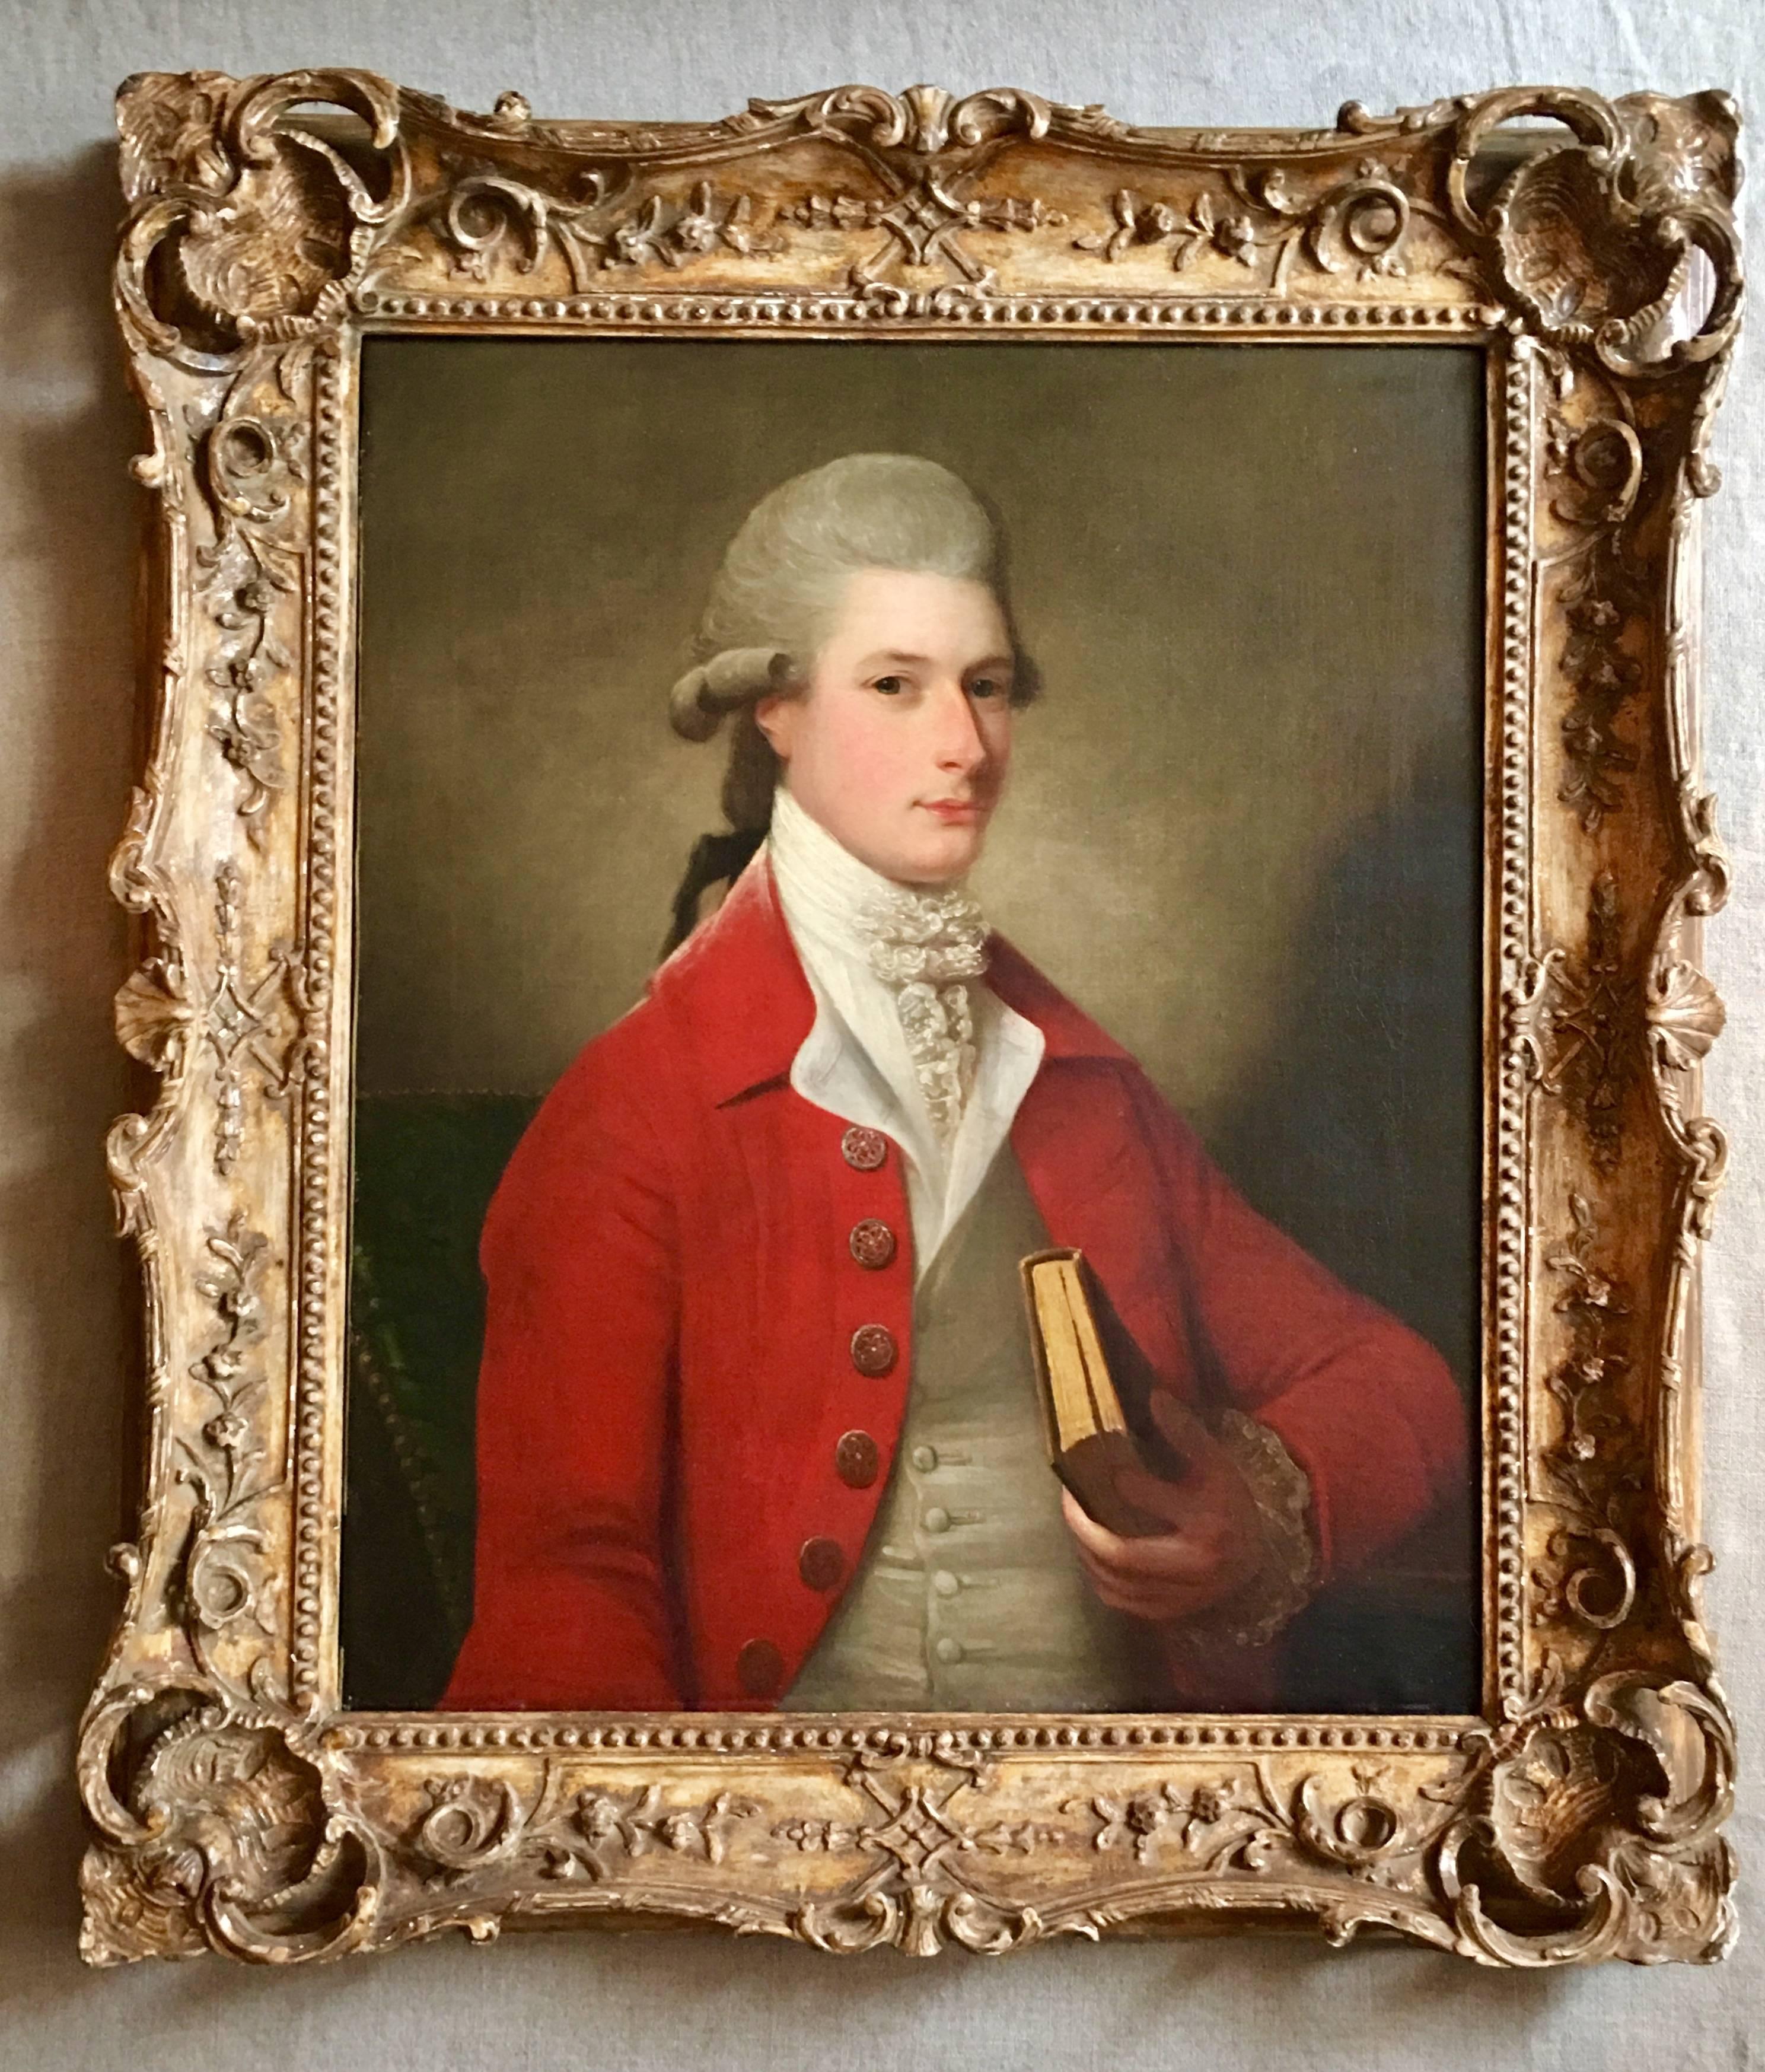 Portrait of Sir Archibald Seton Half-Length Wearing a Red Coat, Holding a Book. - Painting by David Martin